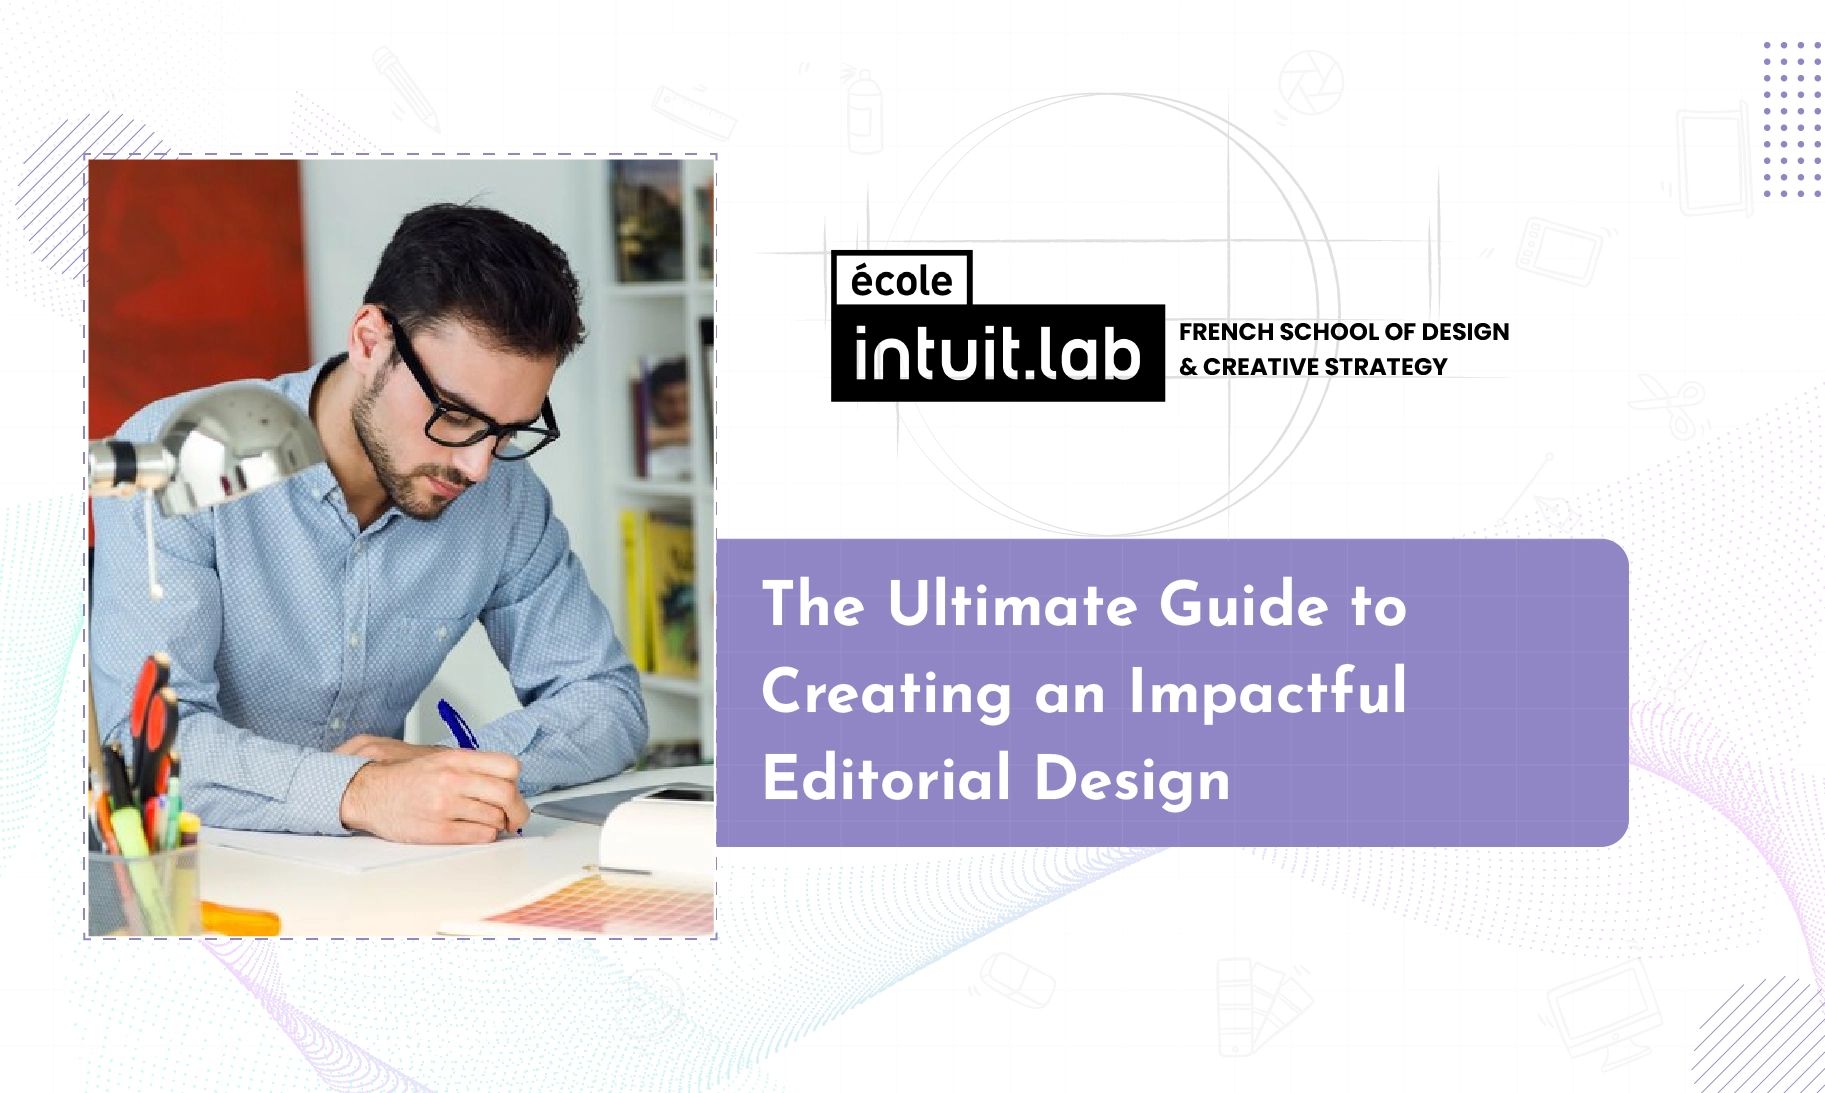 The Ultimate Guide to Creating an Impactful Editorial Design